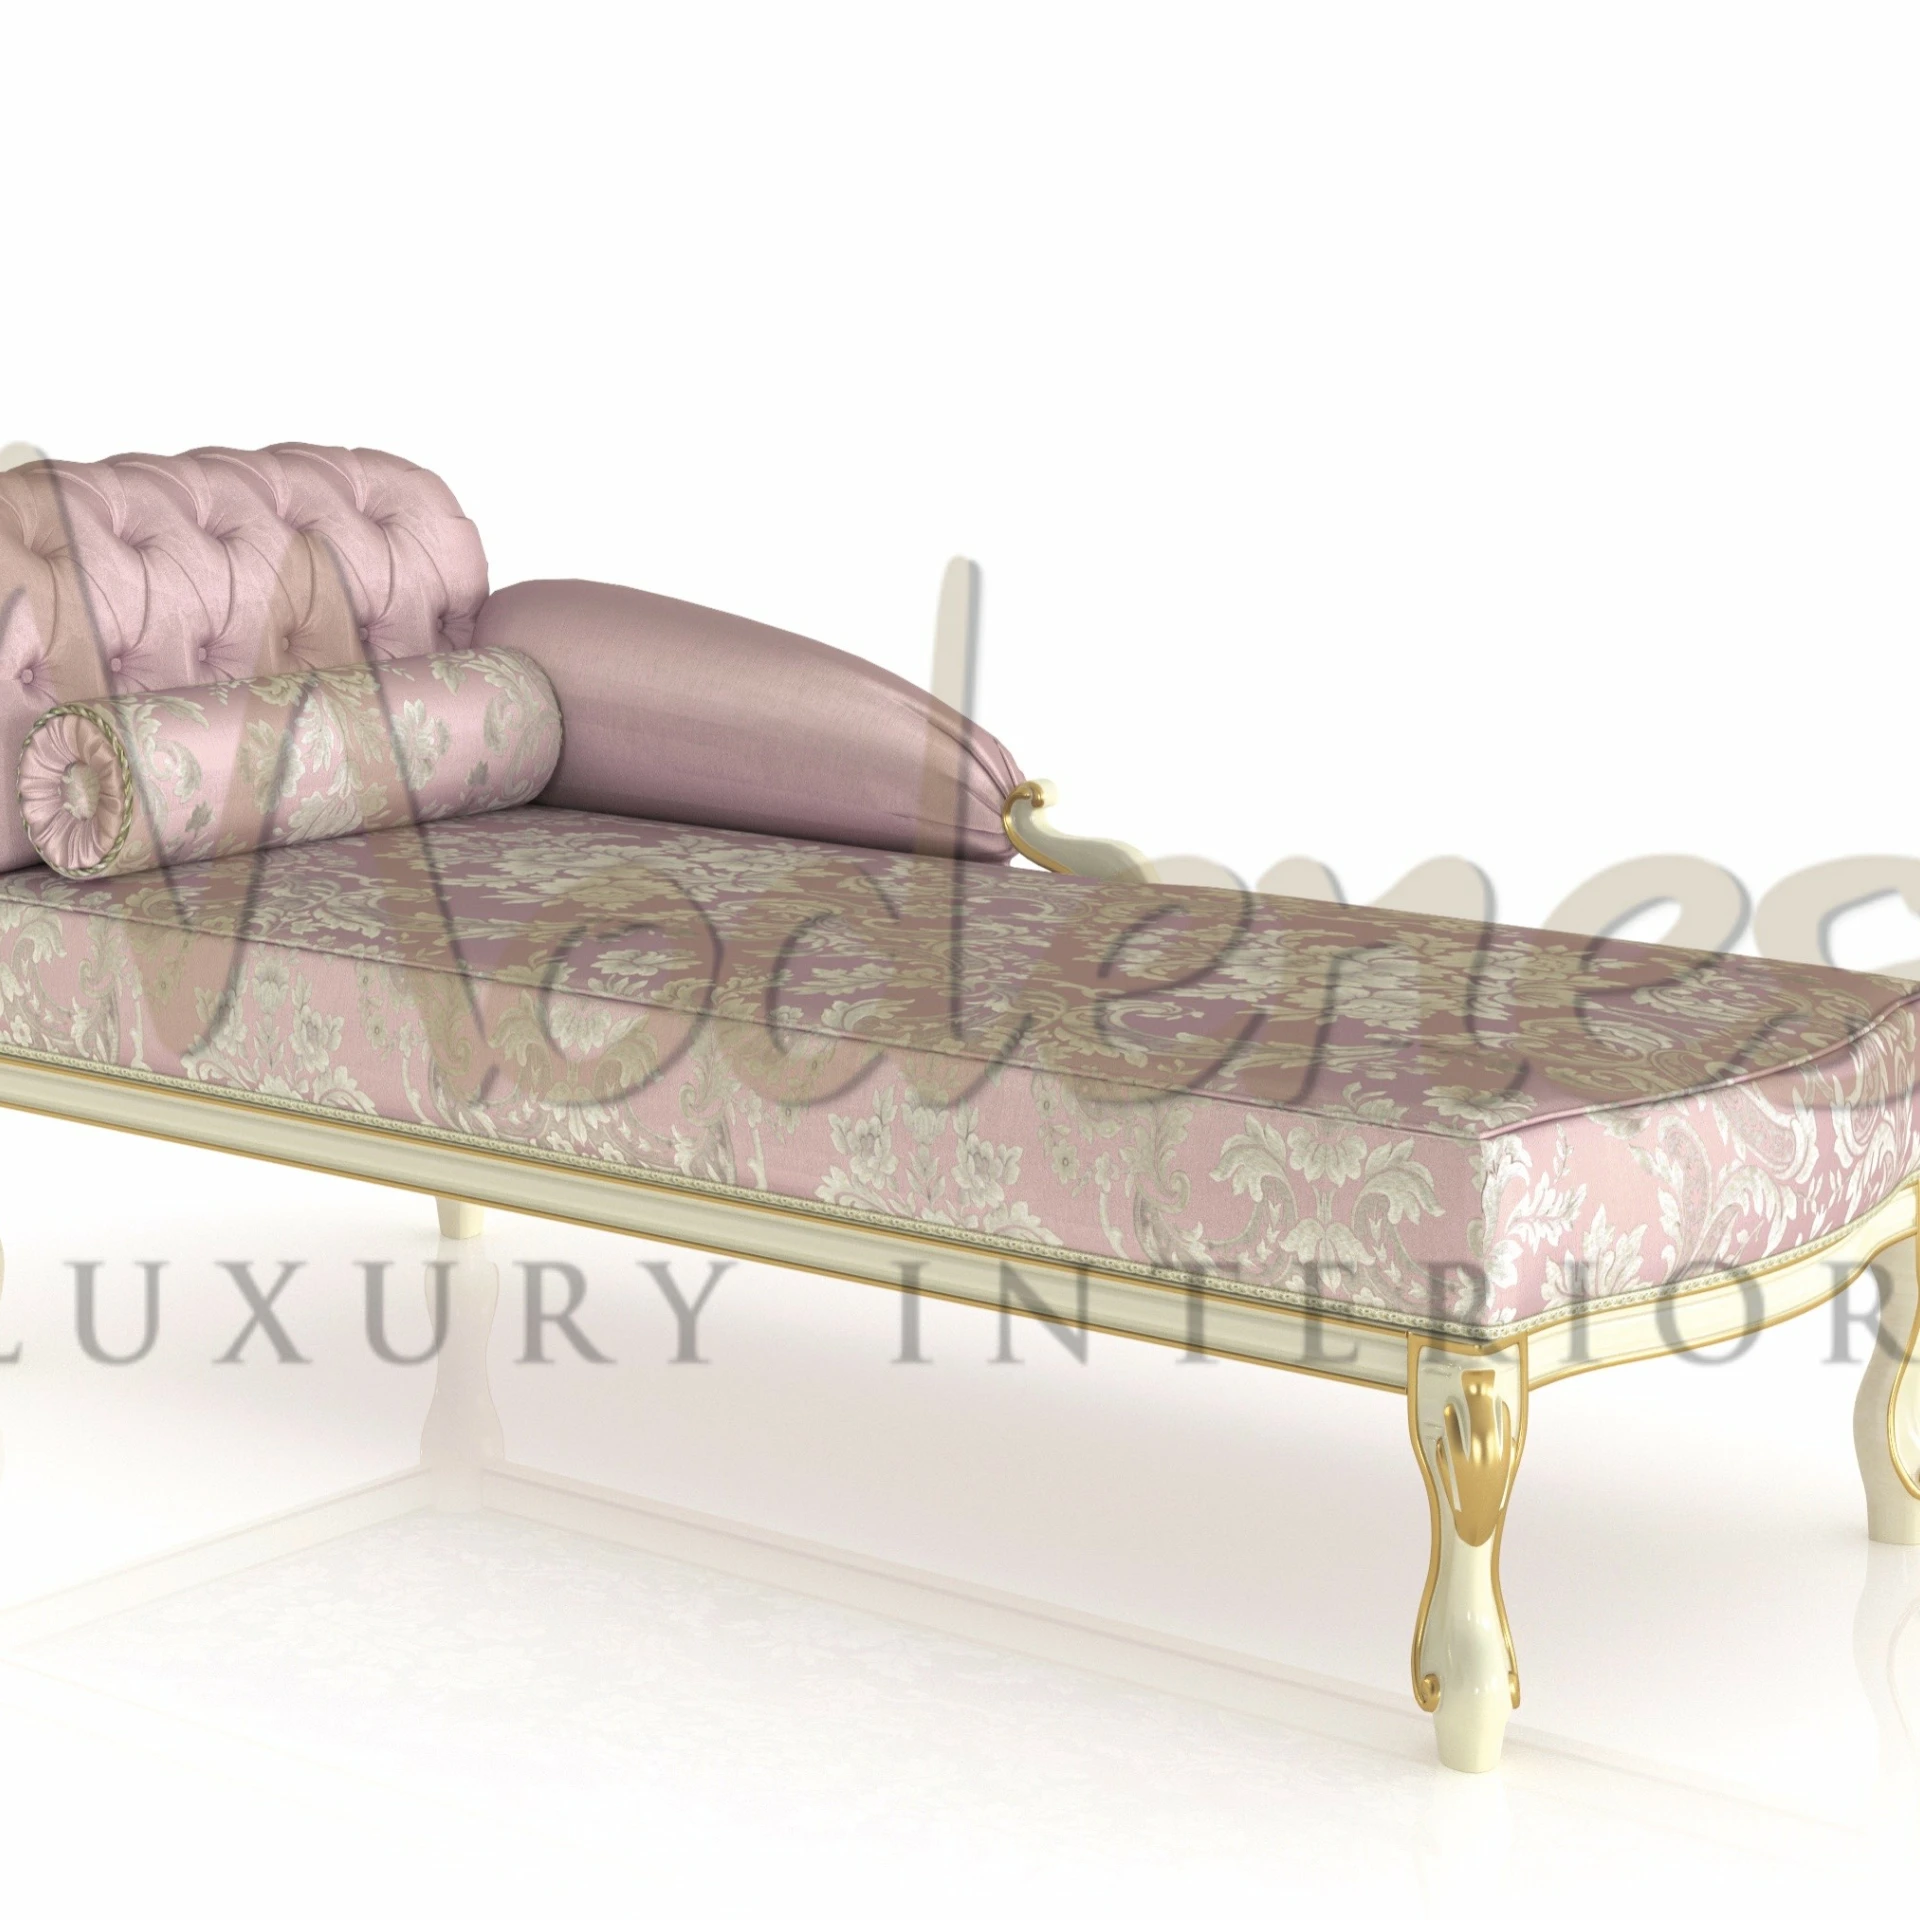 CLASSIC FURNITURE Pink Fabric Chaise Lounge